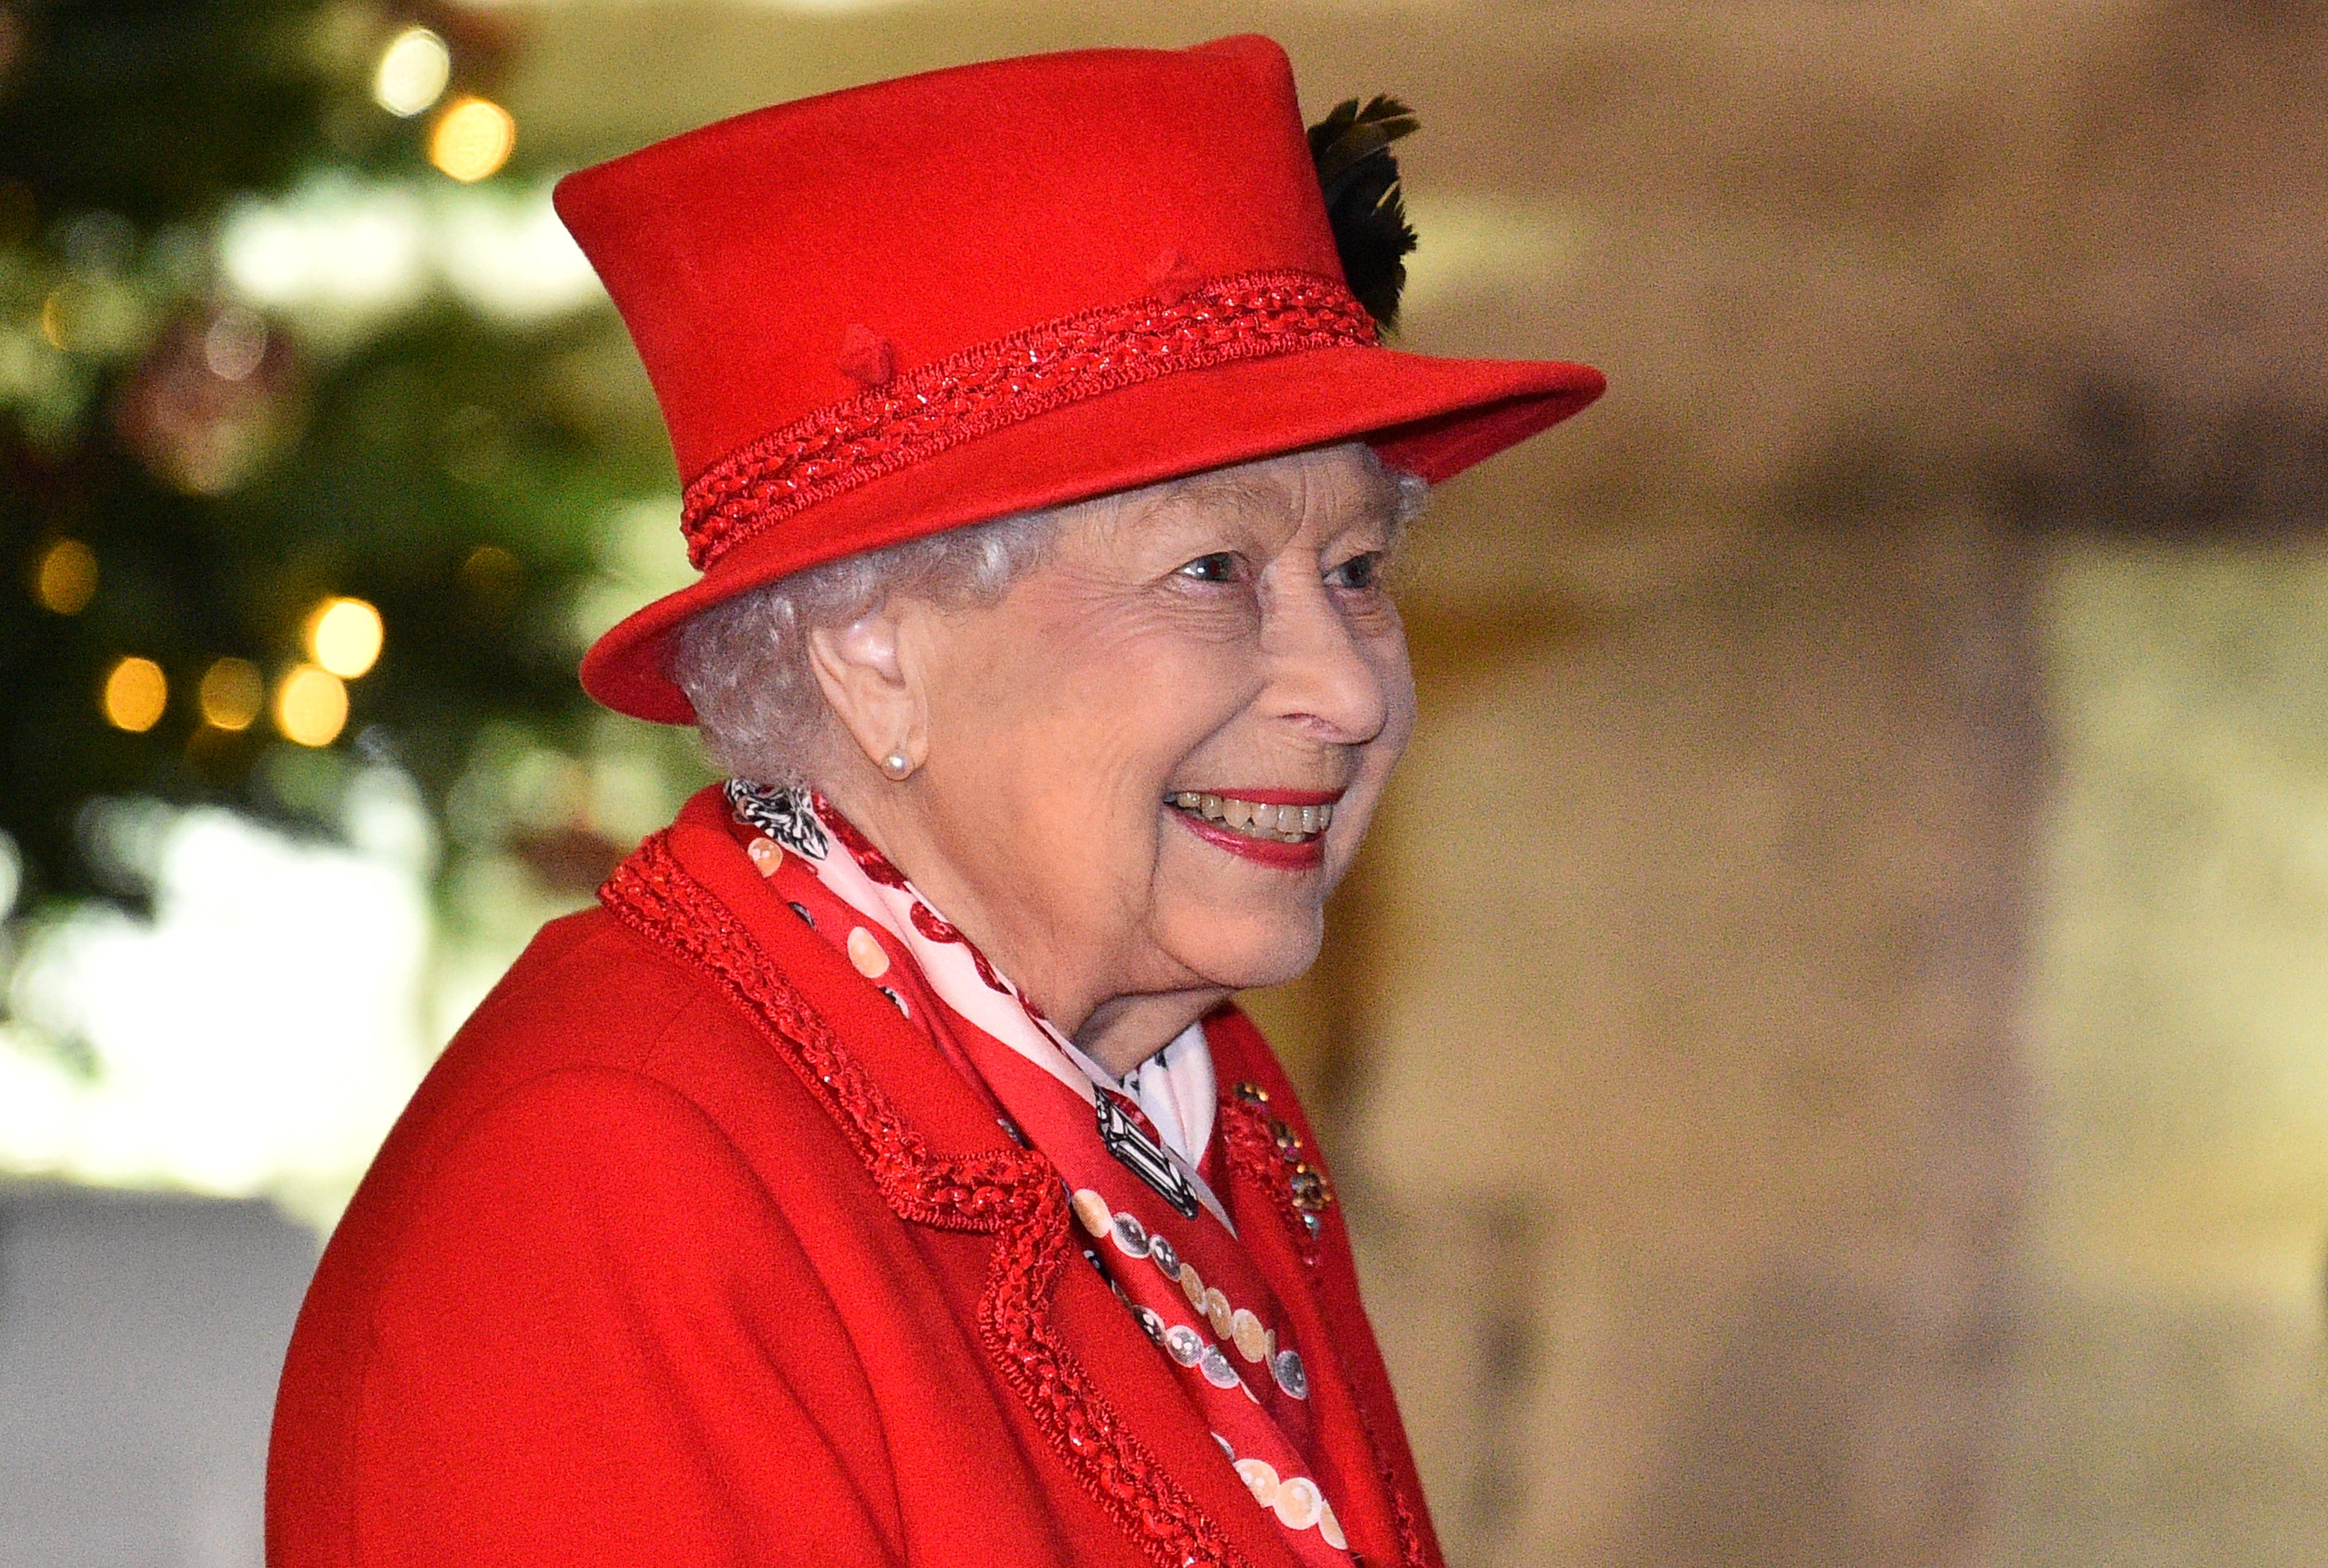 Queen Elizabeth and members of the Royal family appeared in public to thank local volunteers and key workers in Windsor earlier this week